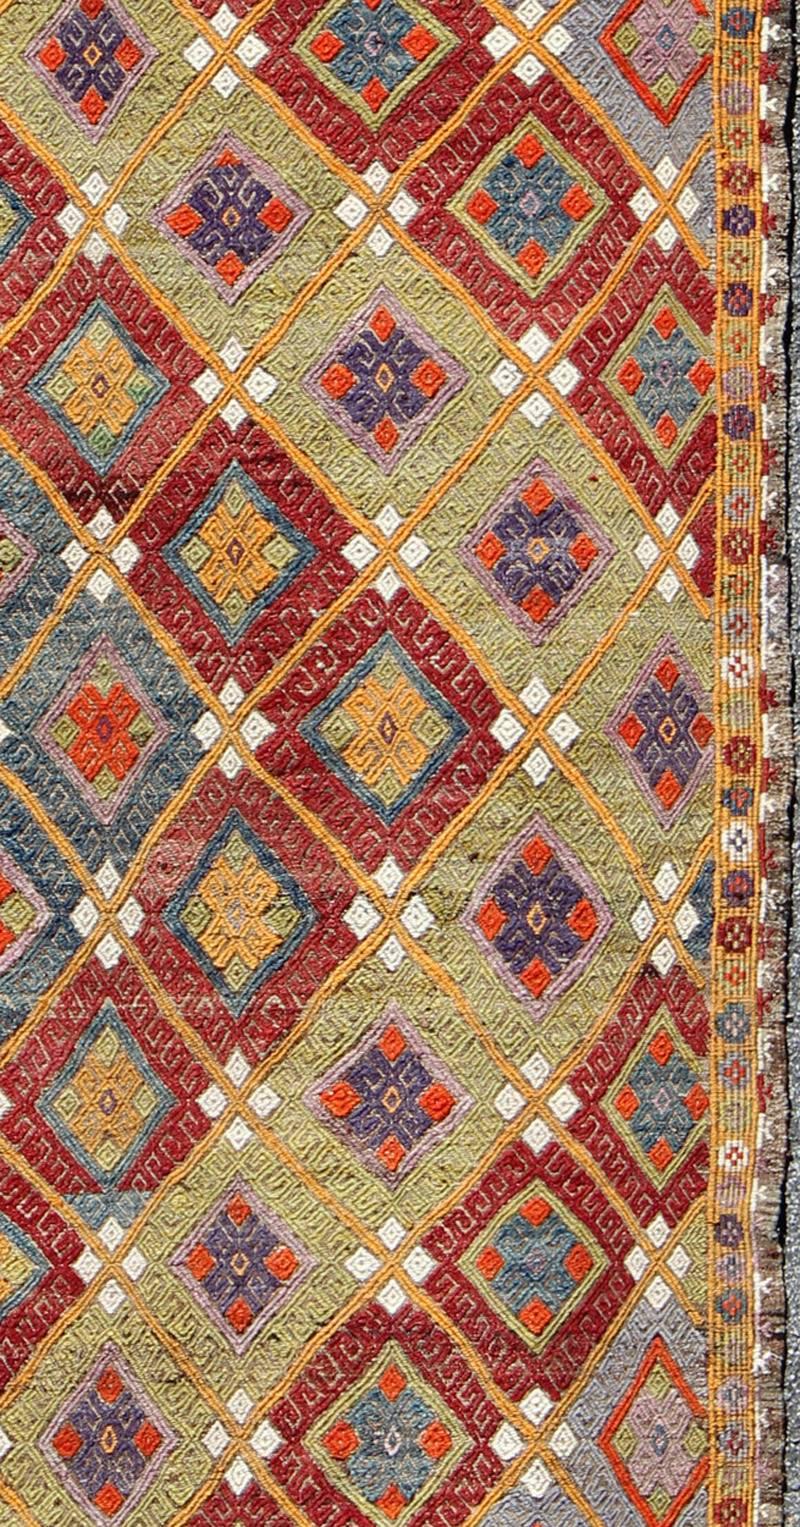 Hand-Woven Colorful Kilim/Jijim with Diamonds in Light Green, Light Blue and Red For Sale